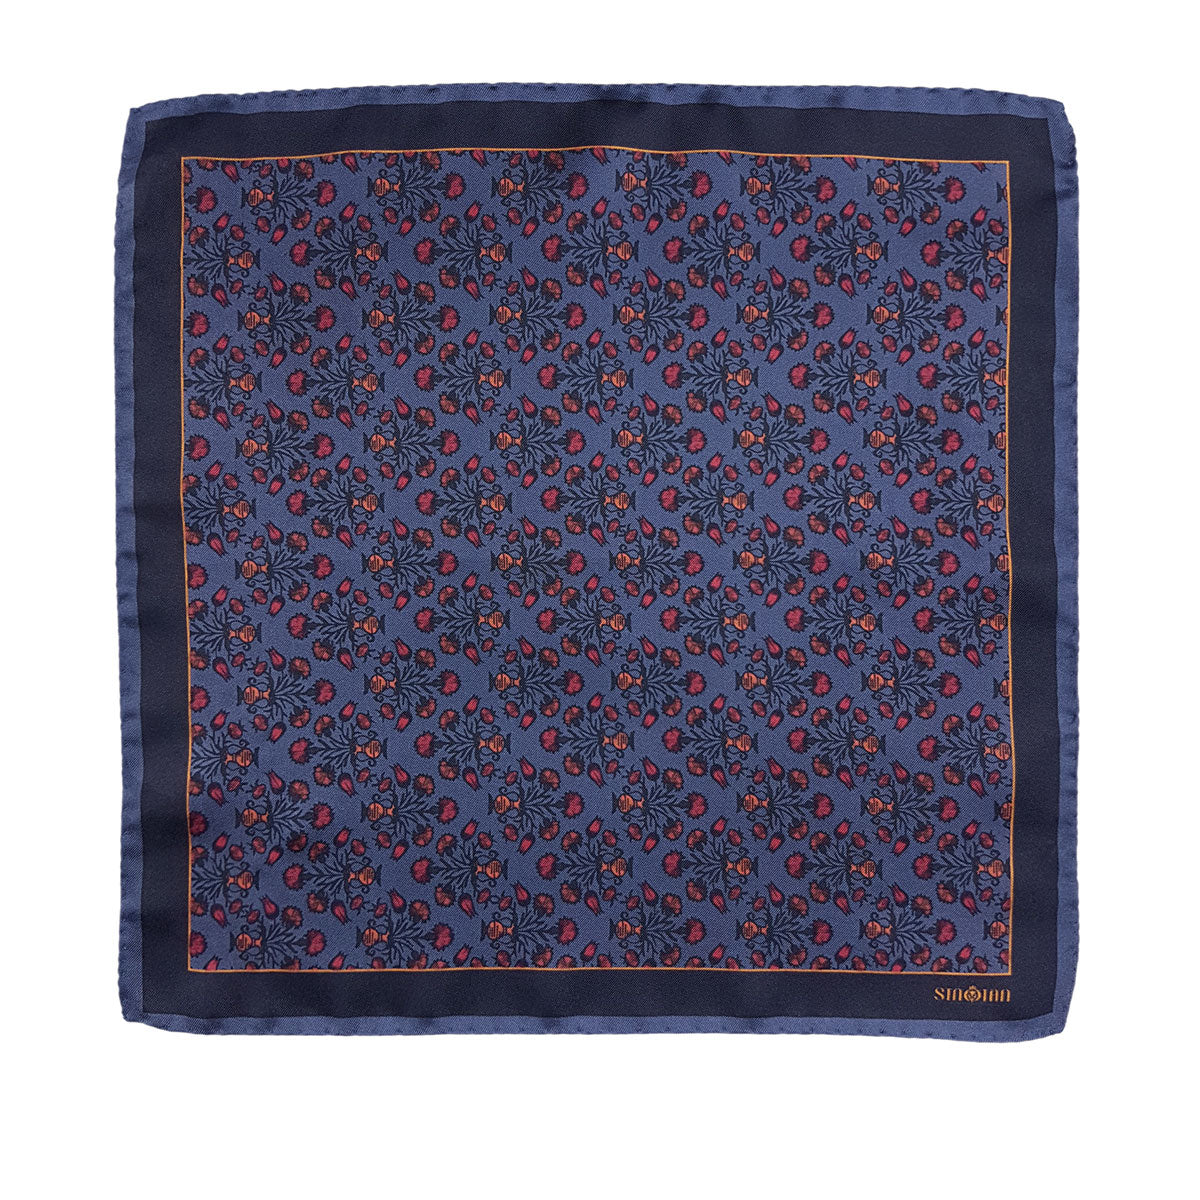 Floral Silk Pocket Square - Blue full view